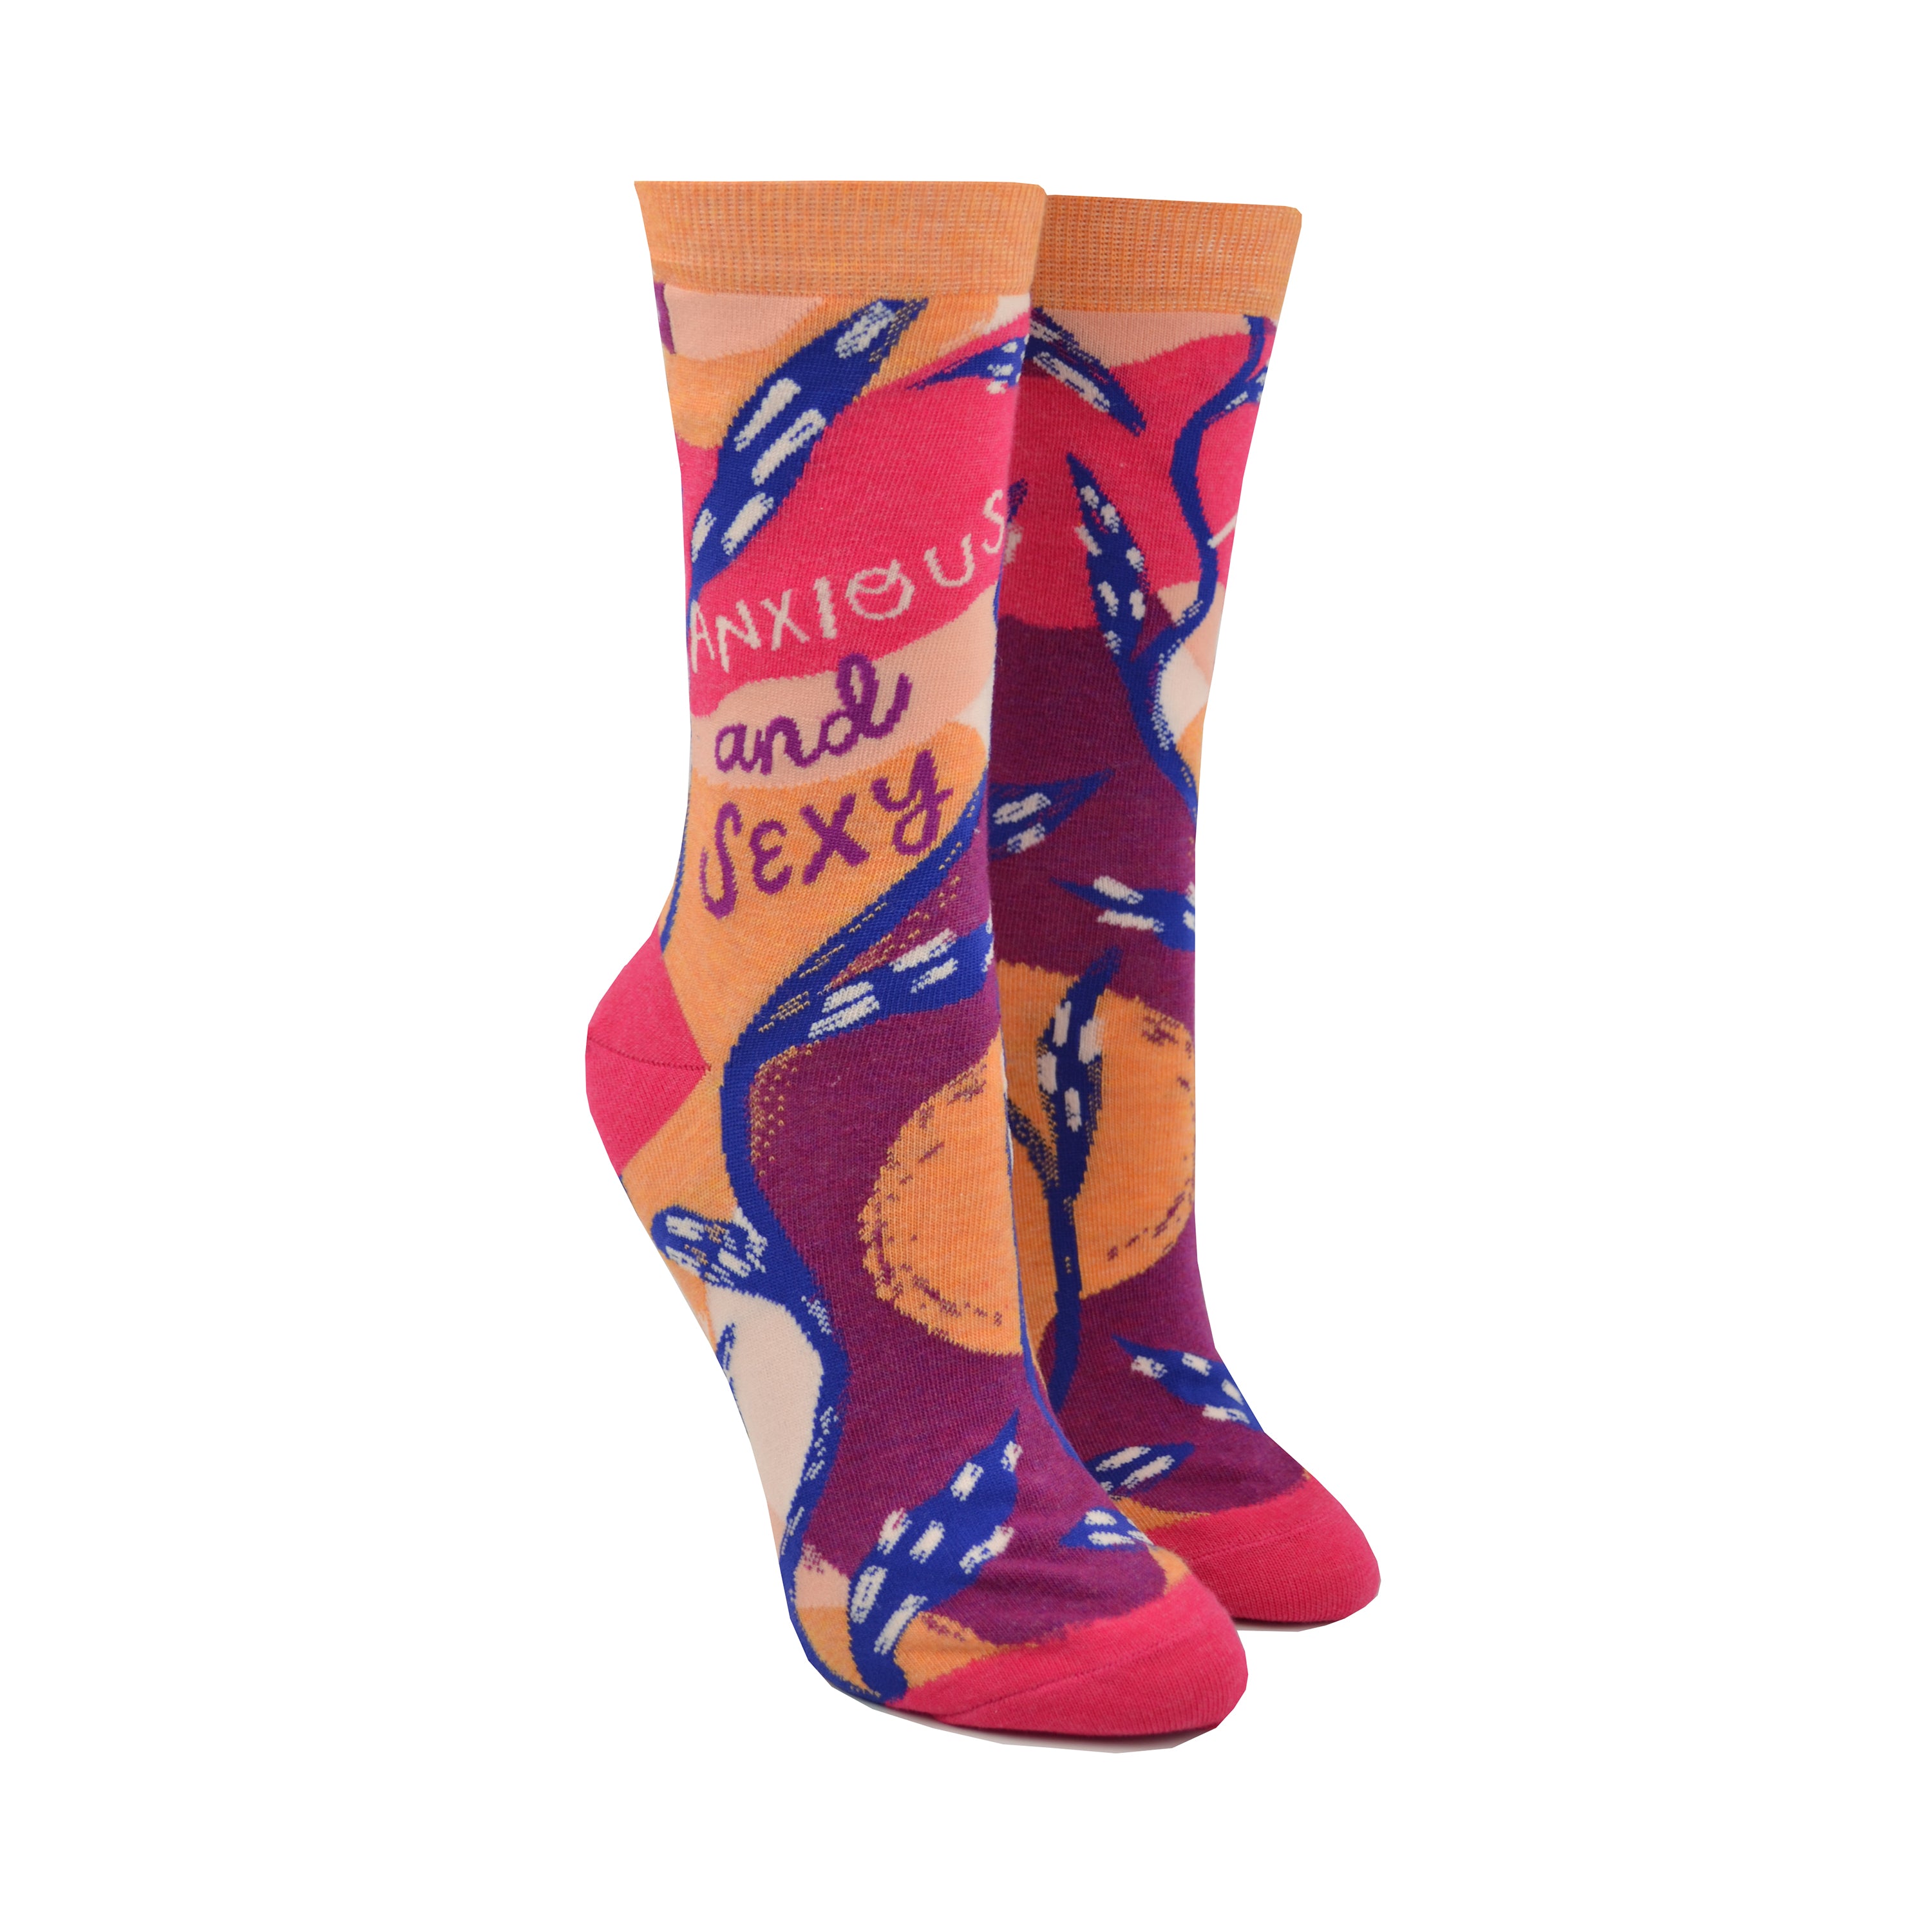 Shown on leg forms, a pair of Blue Q brand women's cotton crew socks with a hot pink heel and toe with an orange cuff. The sock has an abstract design of hot pink, light pink, orange, and purple with a blue vine weaving around the sock. On the leg in a cursive font the sock reads, 